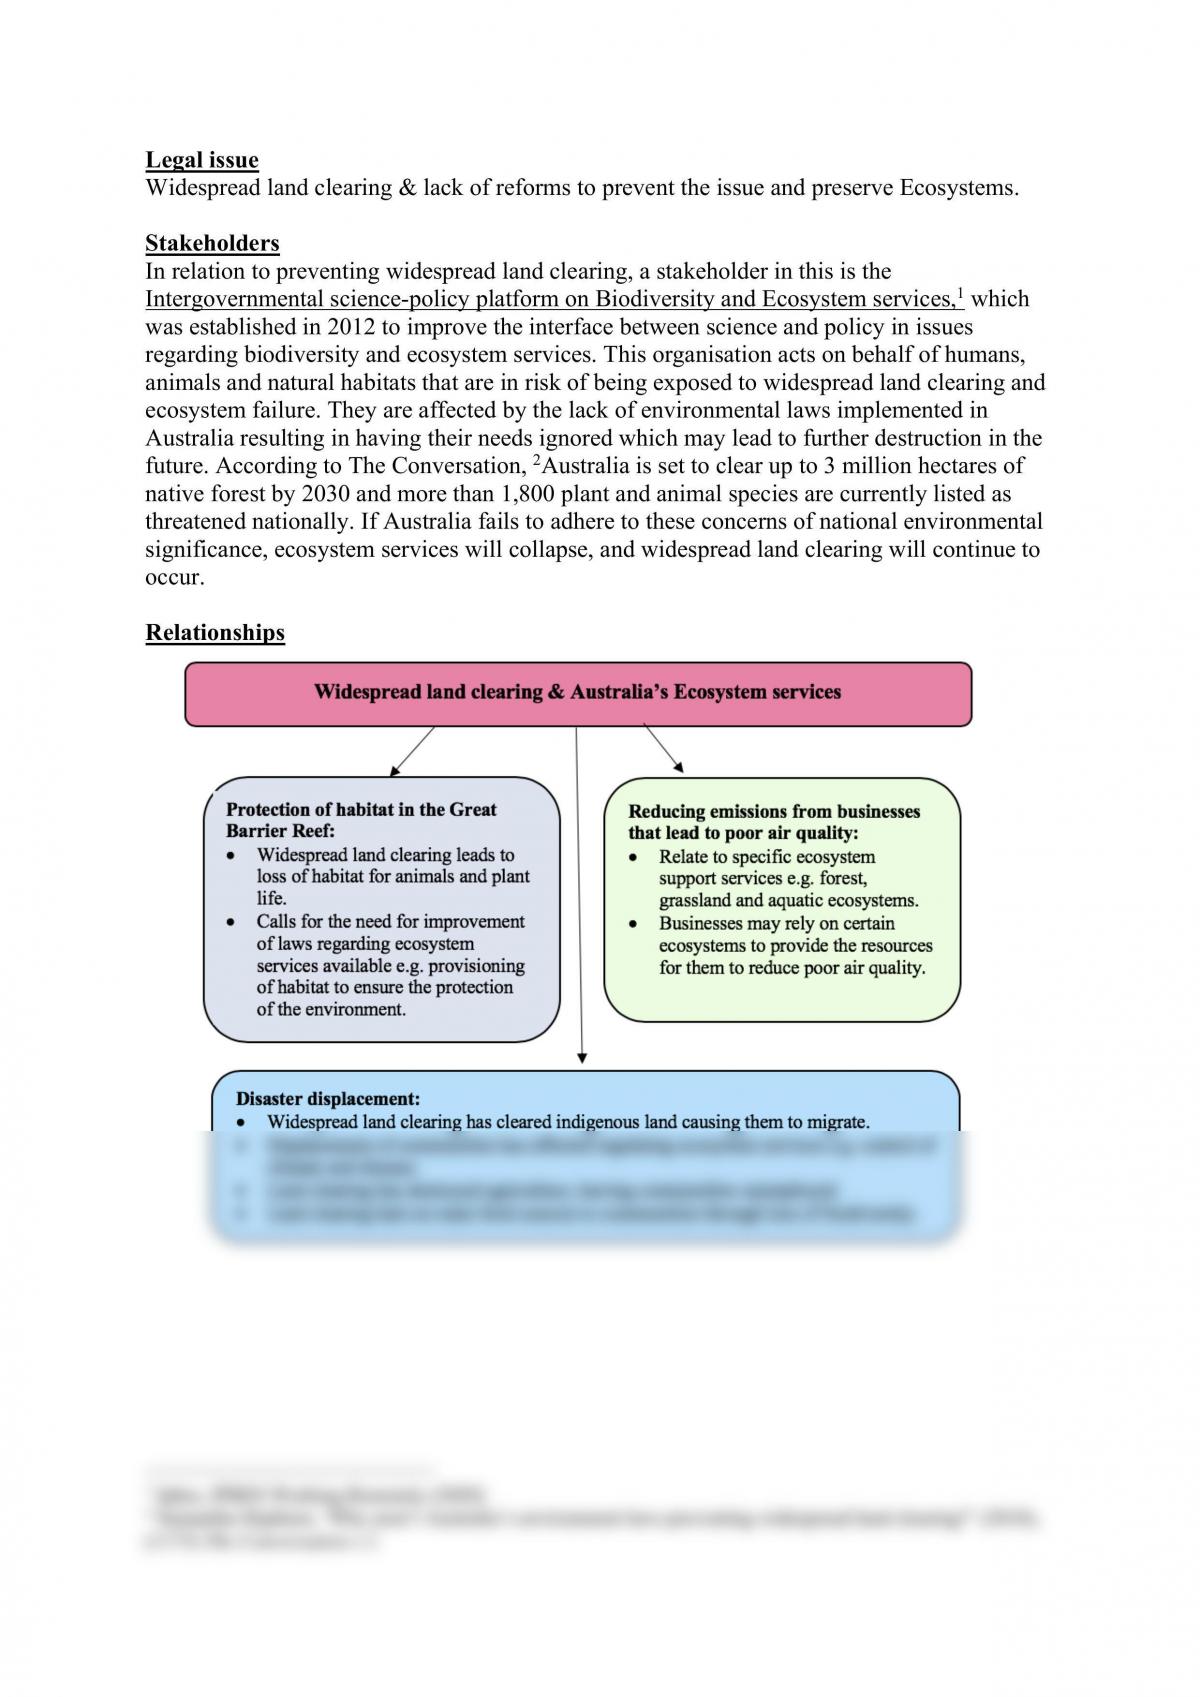 Law and policy reform - Page 1